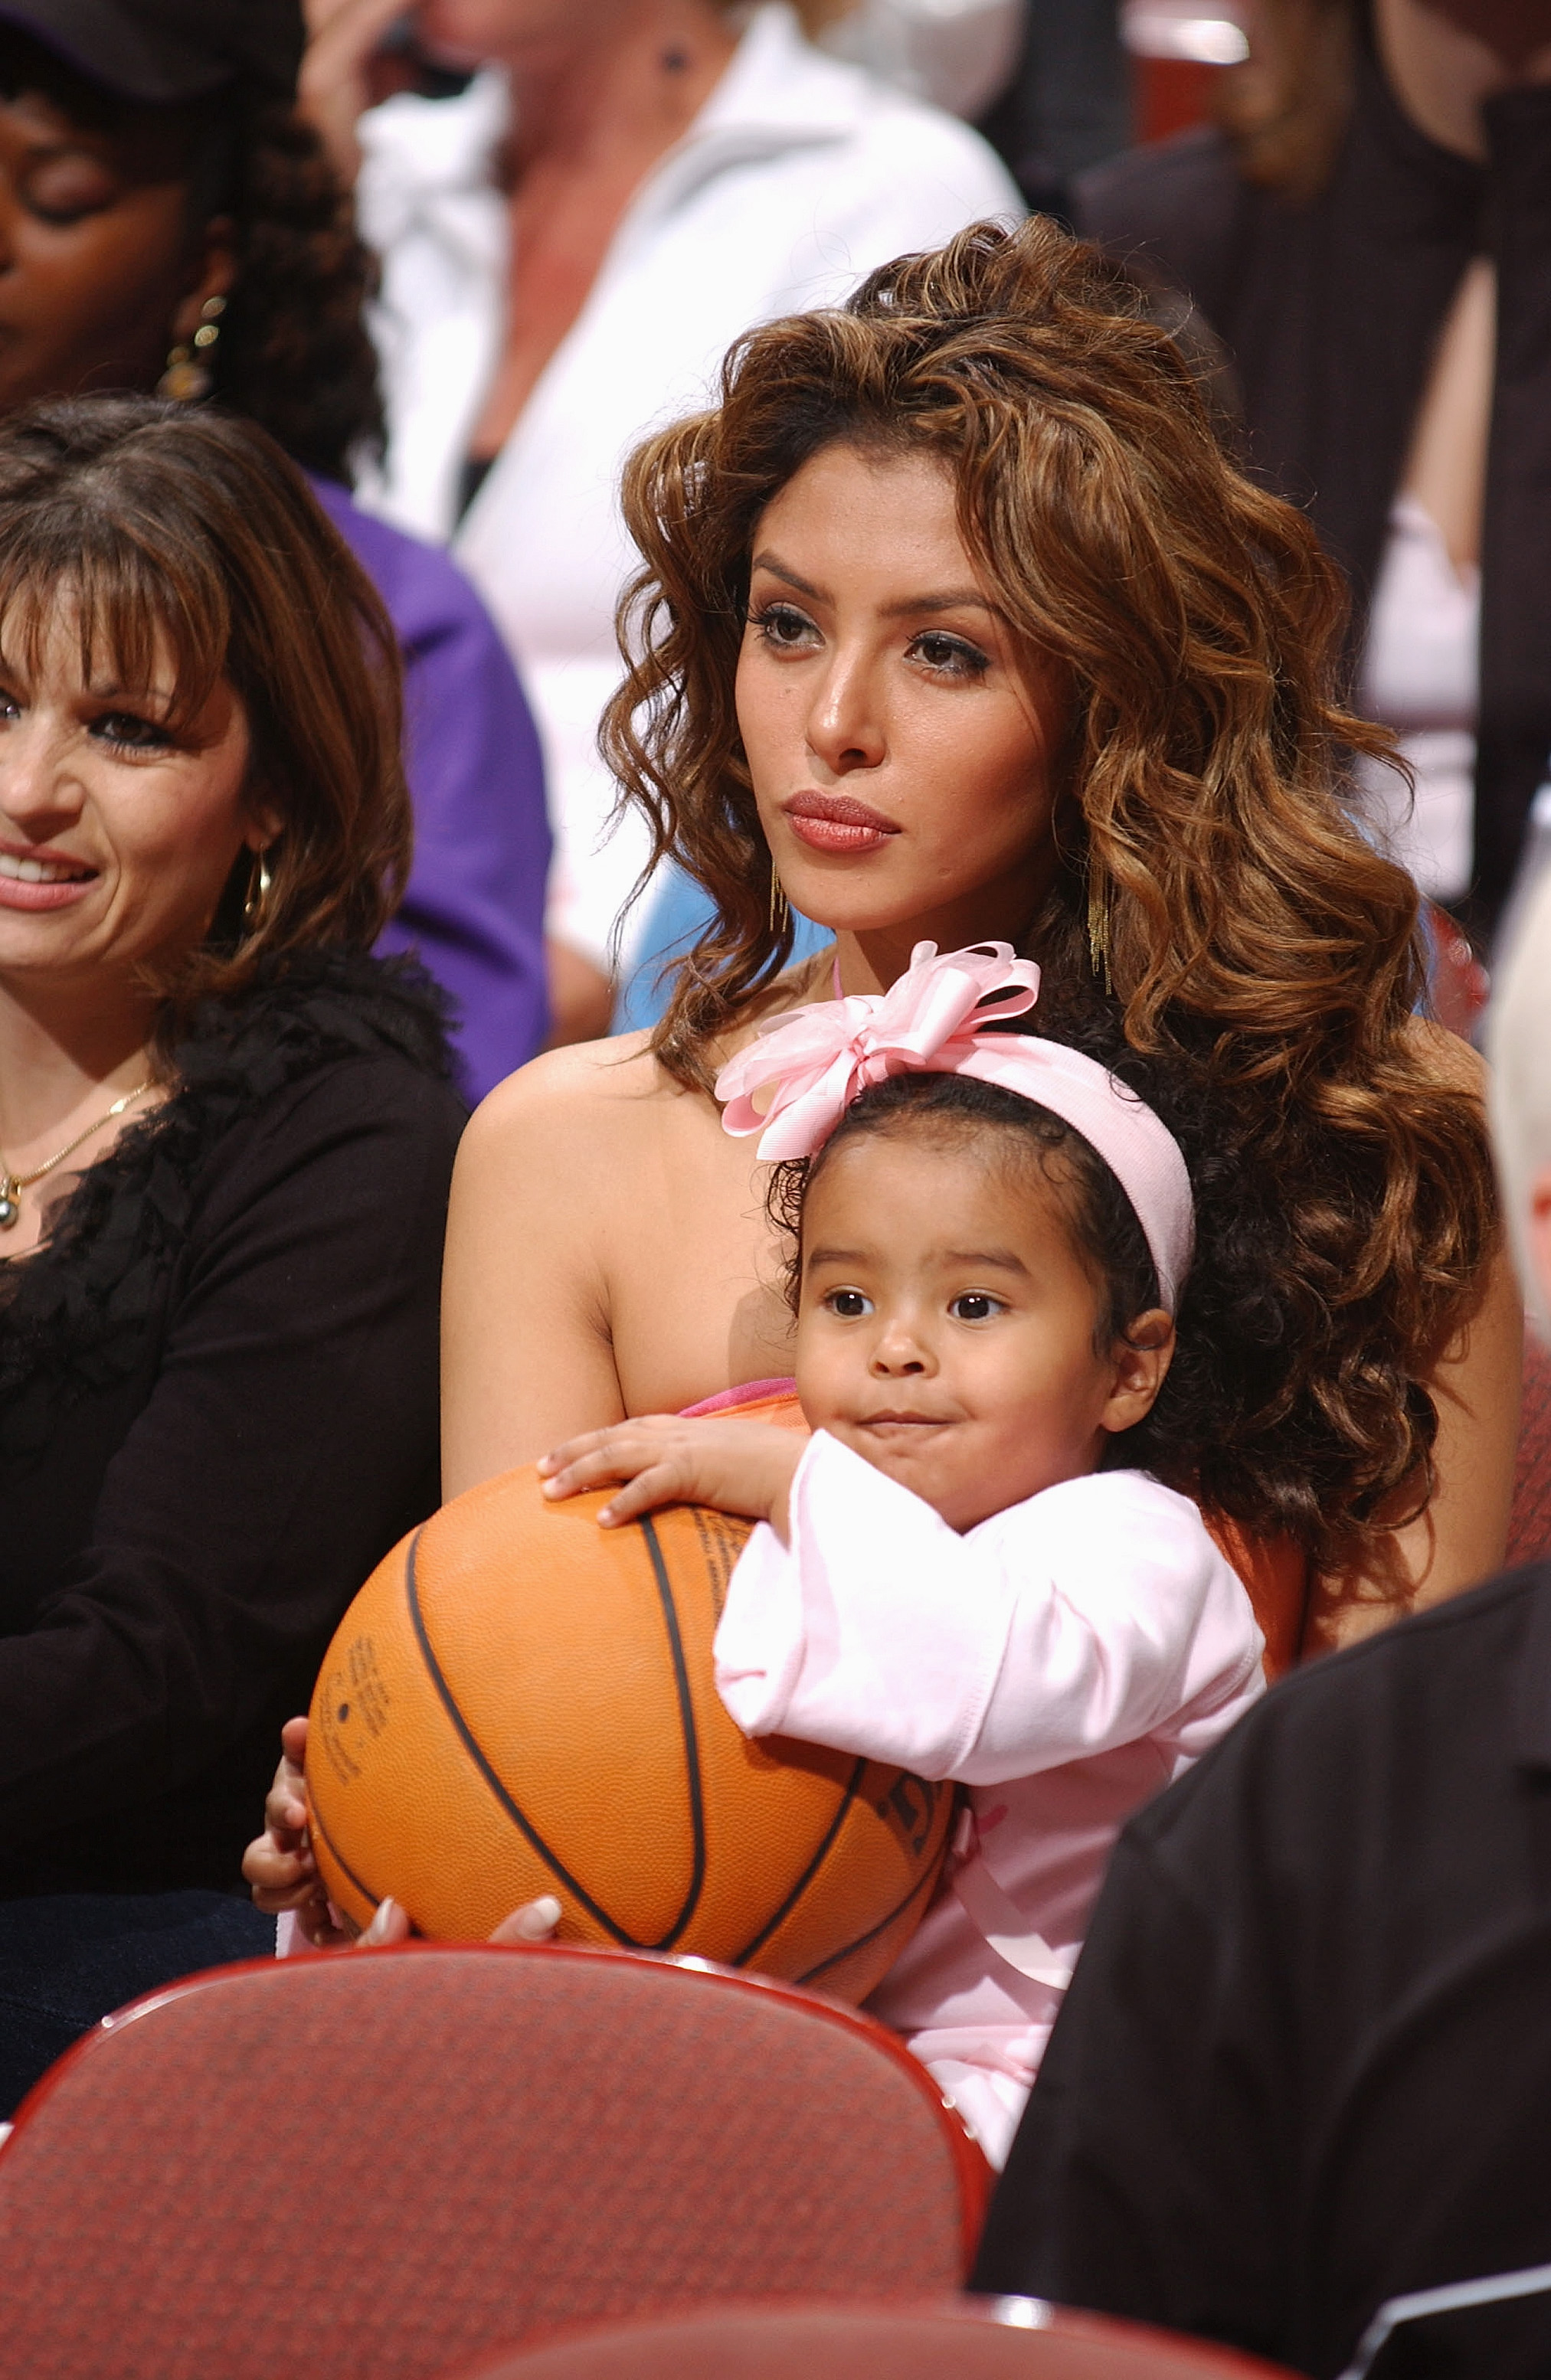 Vanessa Bryant and her daughter Natalia Bryant during the preseason game at Arrowhead Pond of Anaheimon on October 12, 2004 in Anaheim, California | Source: Getty Images